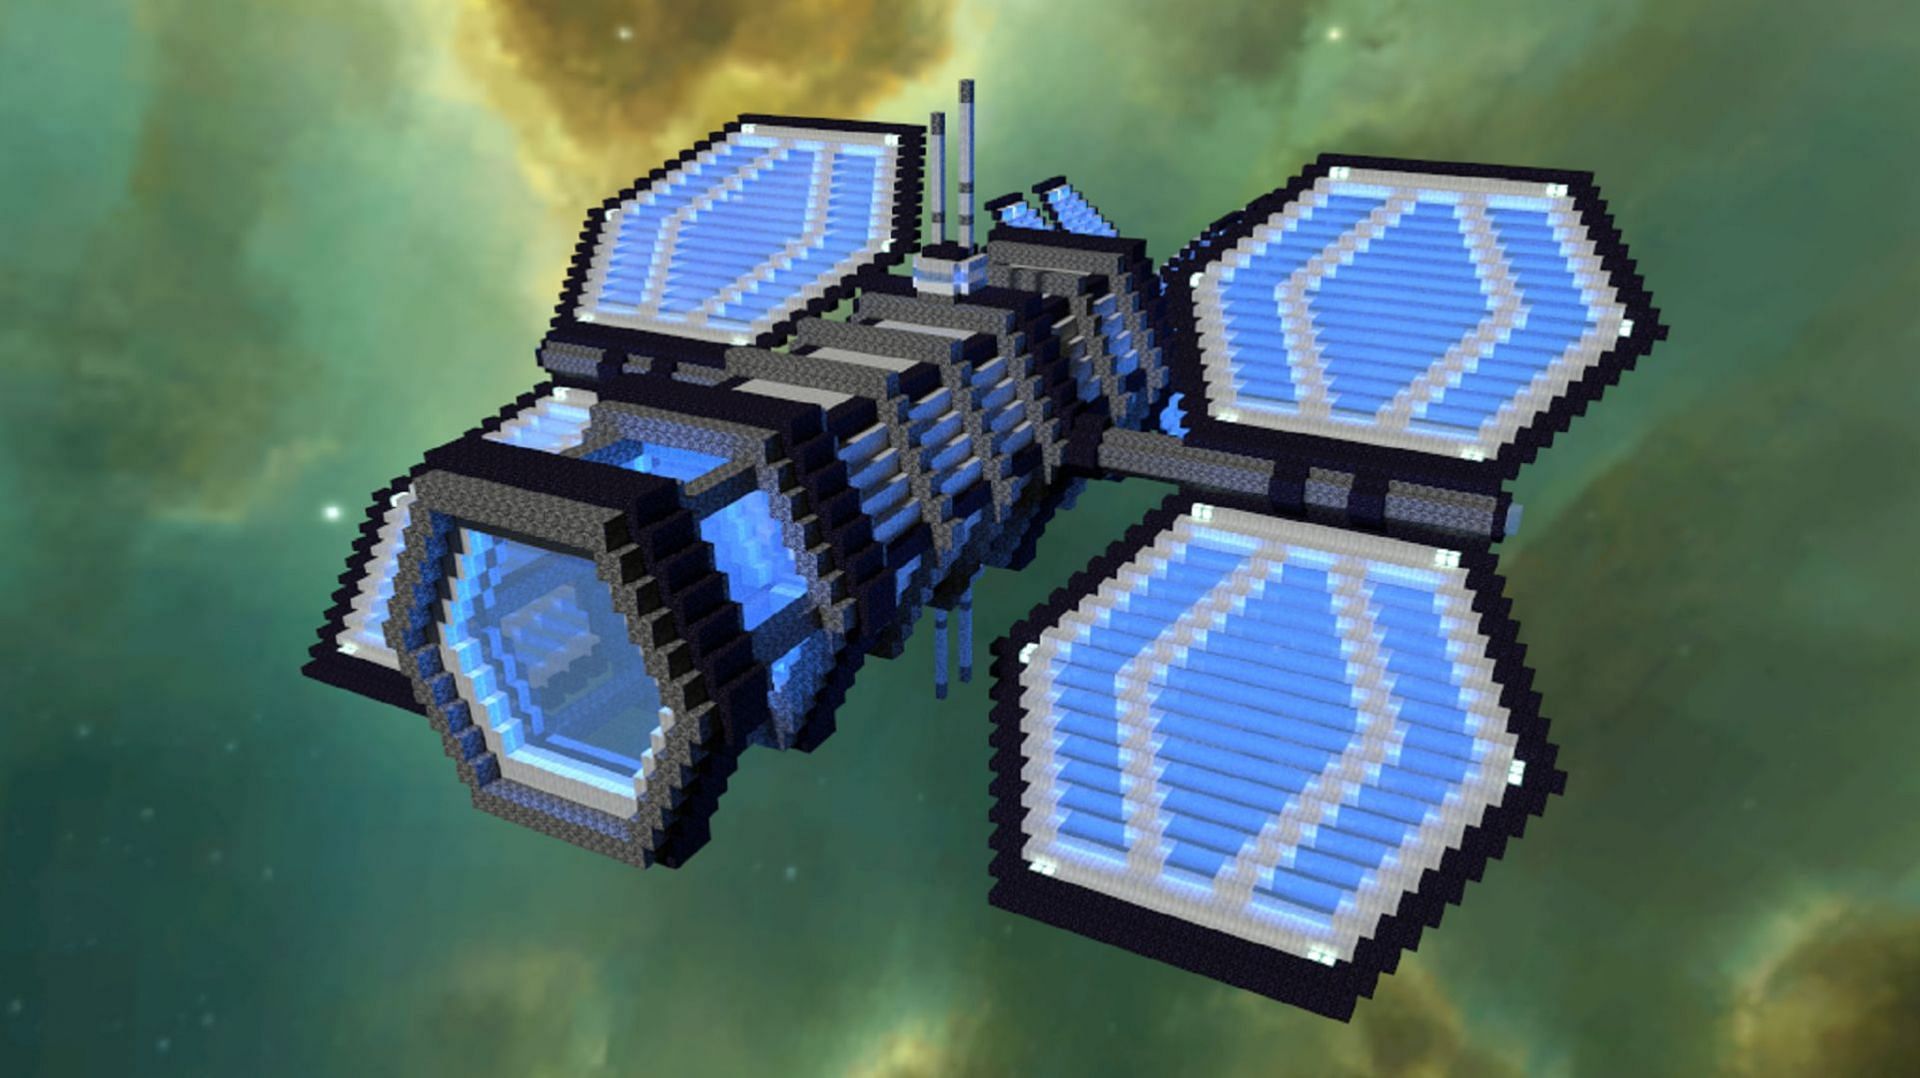 Minecraft fans can look to the stars of deep space with this impressive space telescope build (Image via Trydar/Reddit)